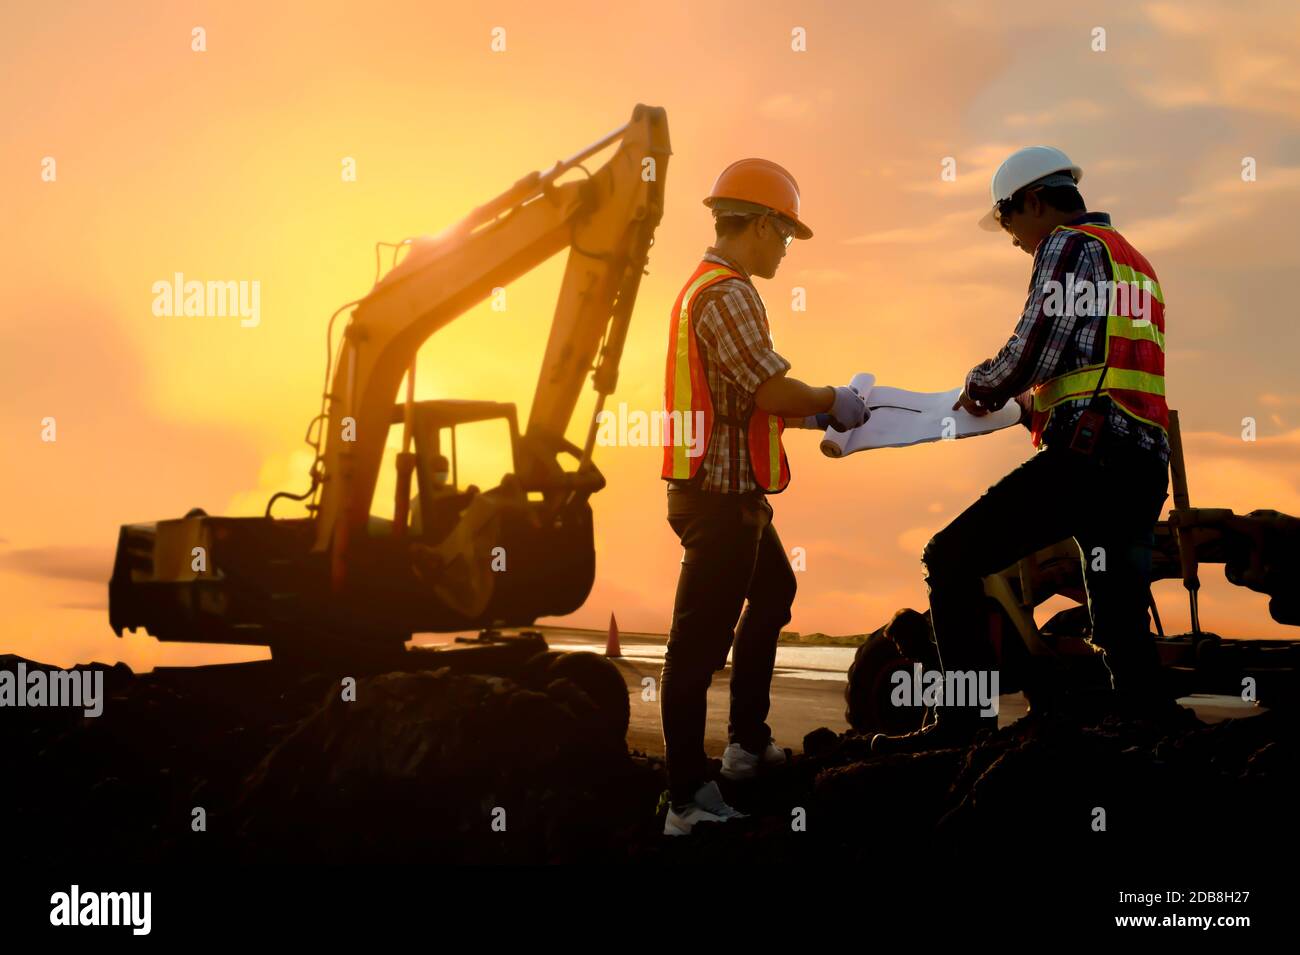 Two engineers looking at building plans on a construction site, Thailand Stock Photo